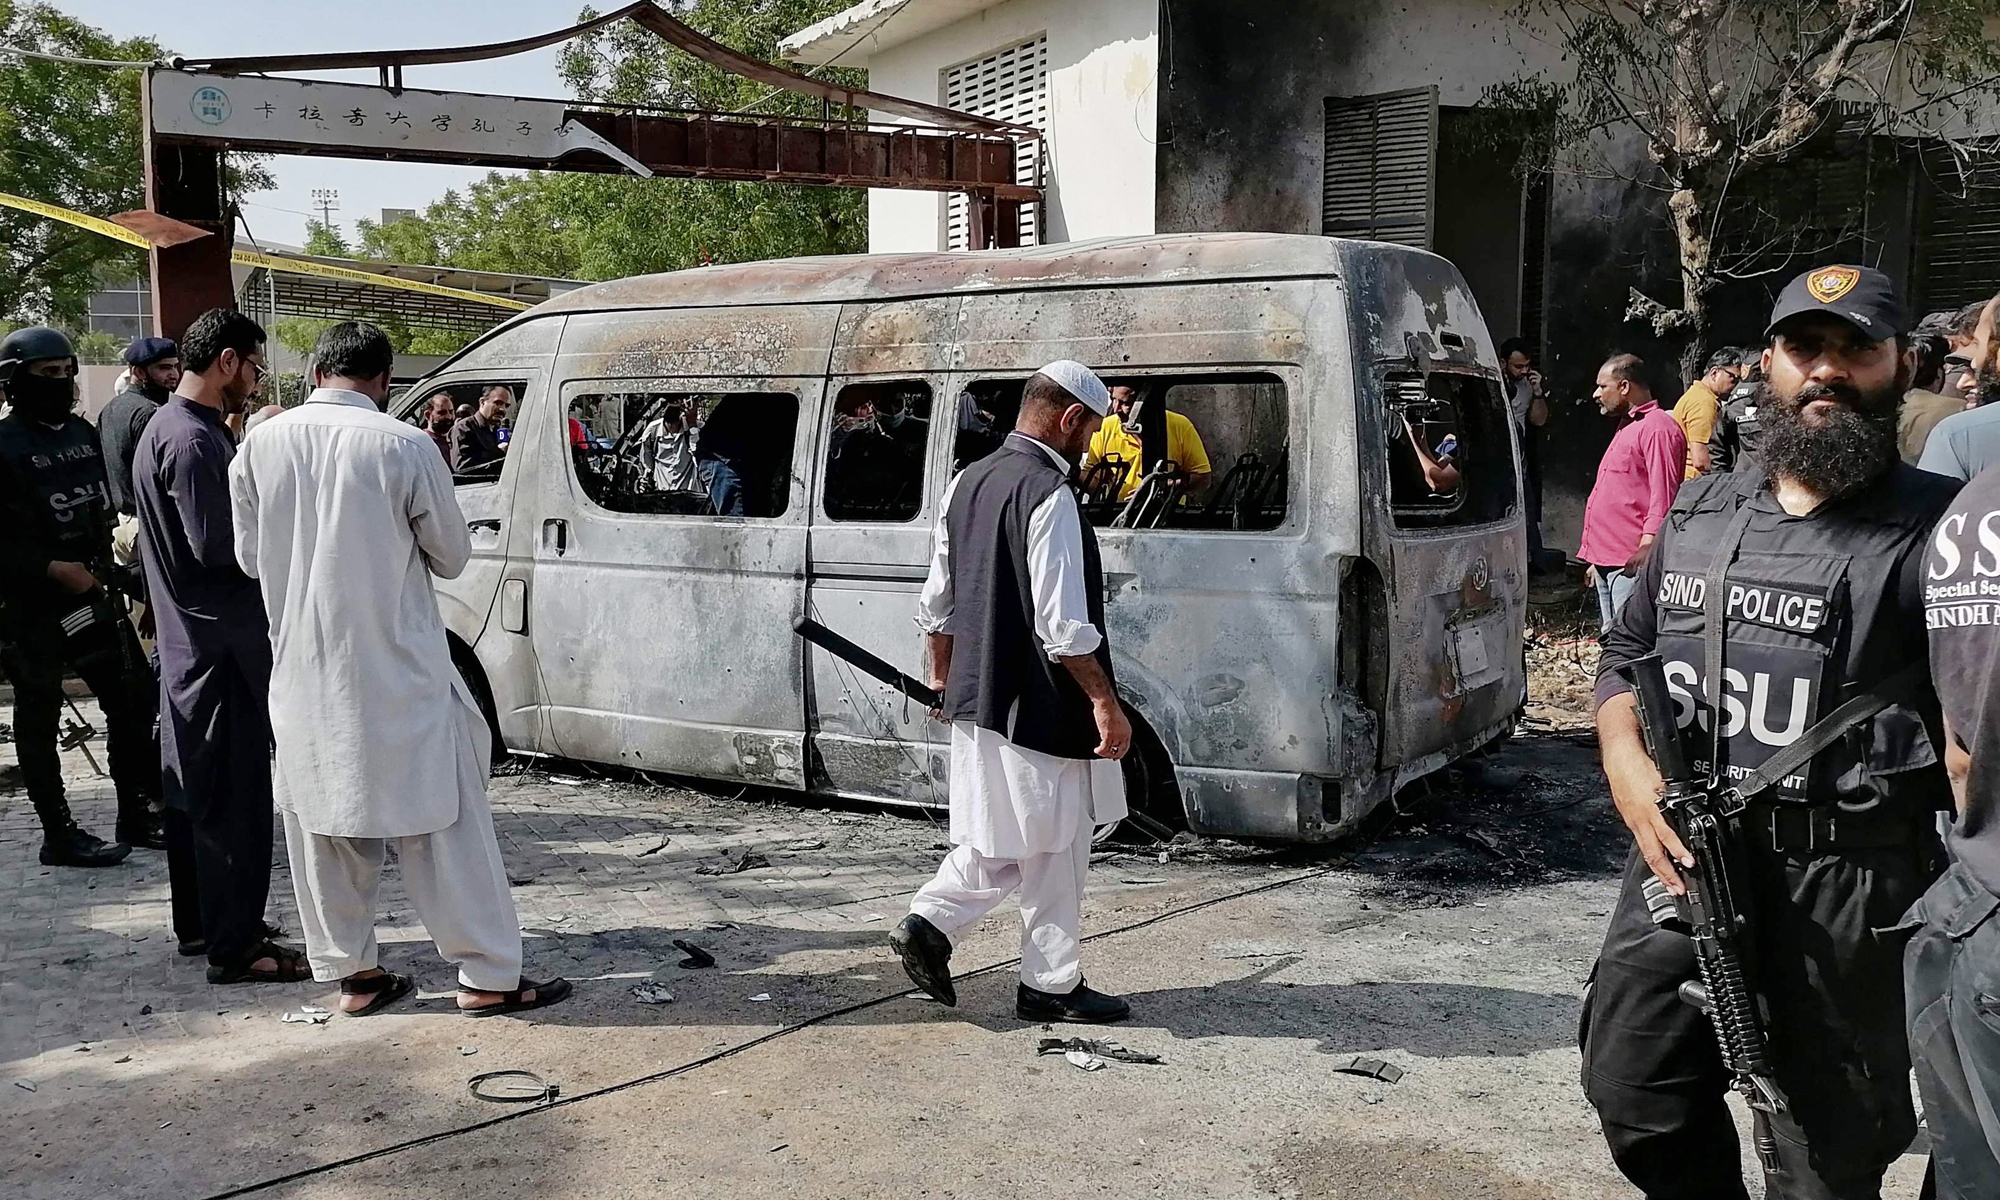 Police inspect a site around a damaged vehicle following a suicide bombing near the Confucius Institute affiliated with the Karachi University, in Karachi on April 26, 2022. A woman suicide bomber from a Pakistan separatist group killed four people, including three Chinese nationals, in an attack on a vehicle carrying staff from the Confucius Institute affiliated with the Karachi University. Photo: AFP